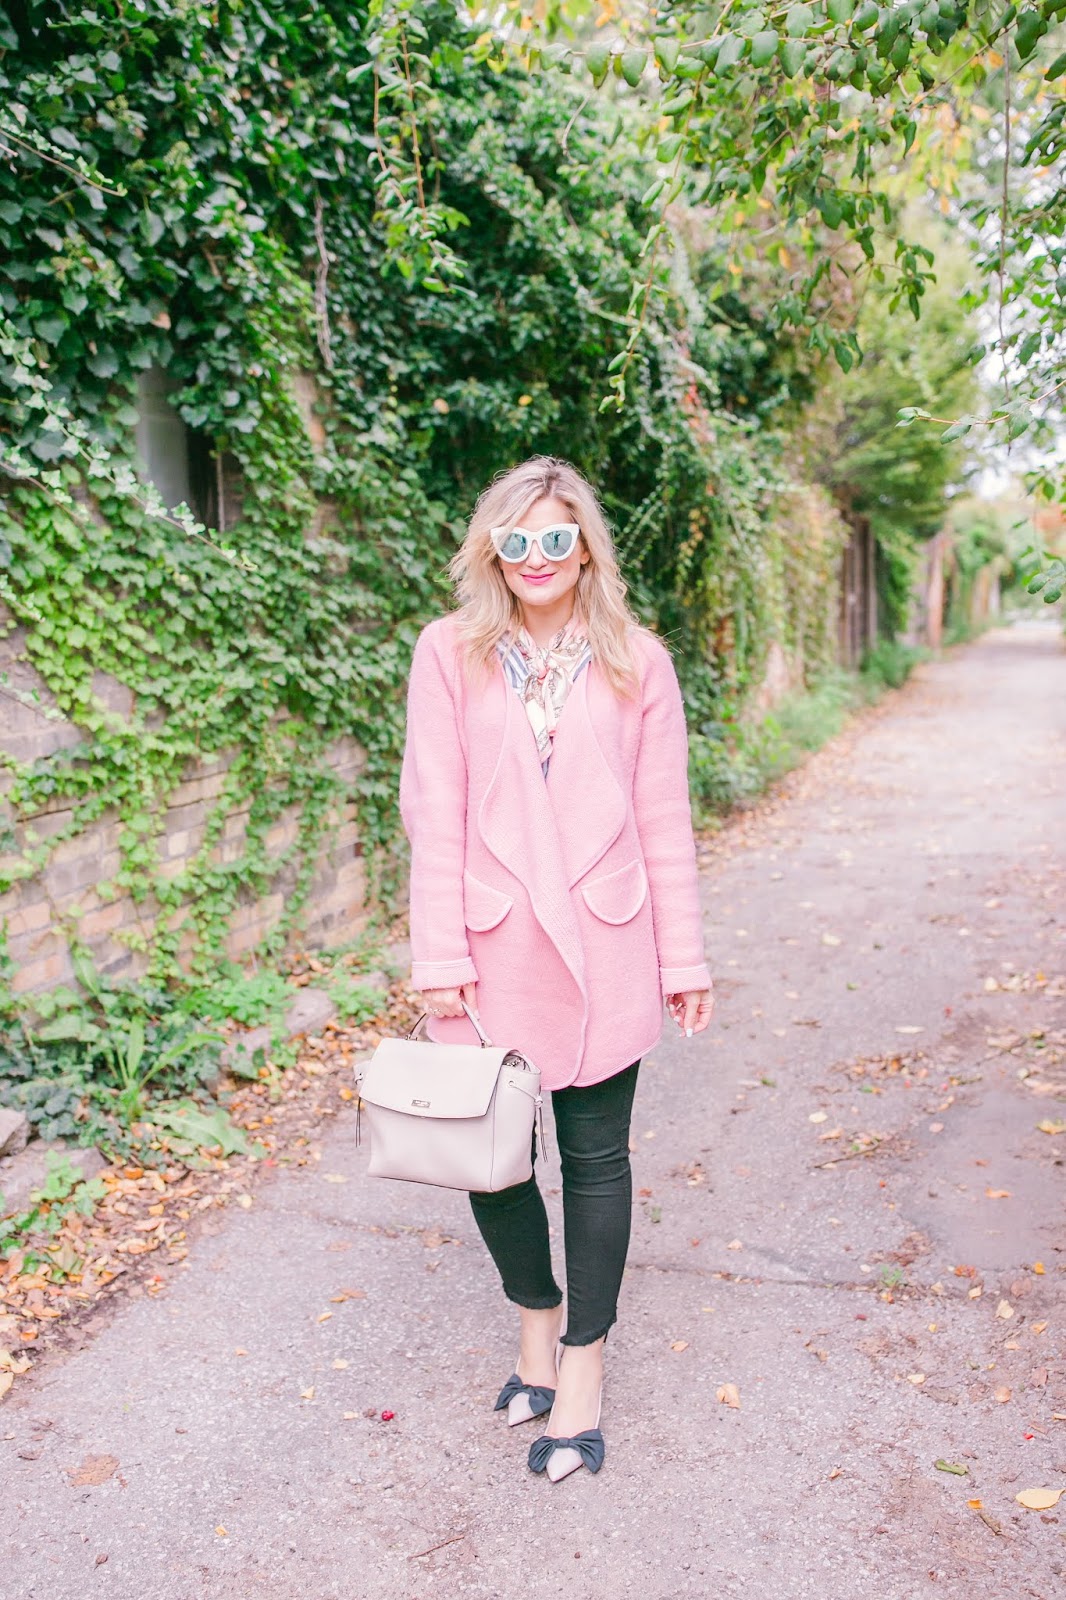 Bijuleni - How to Wear Your Cardigan in a Stylish Way - Chicwish Pink Cardigan 